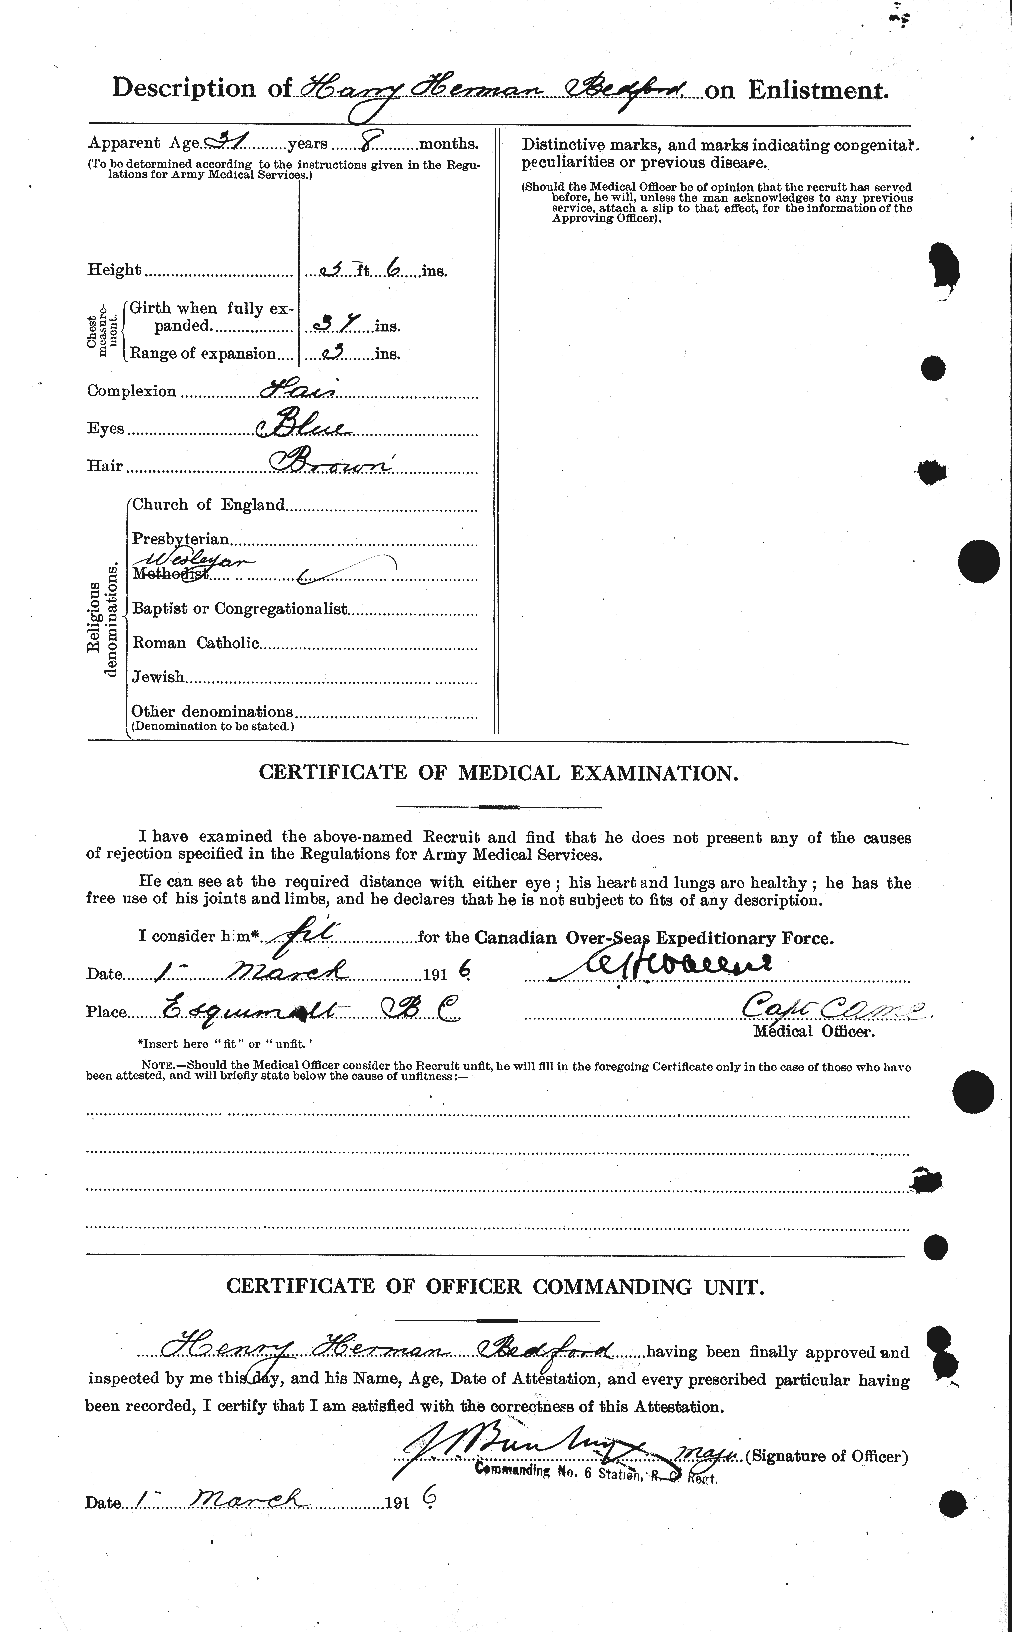 Personnel Records of the First World War - CEF 236185b